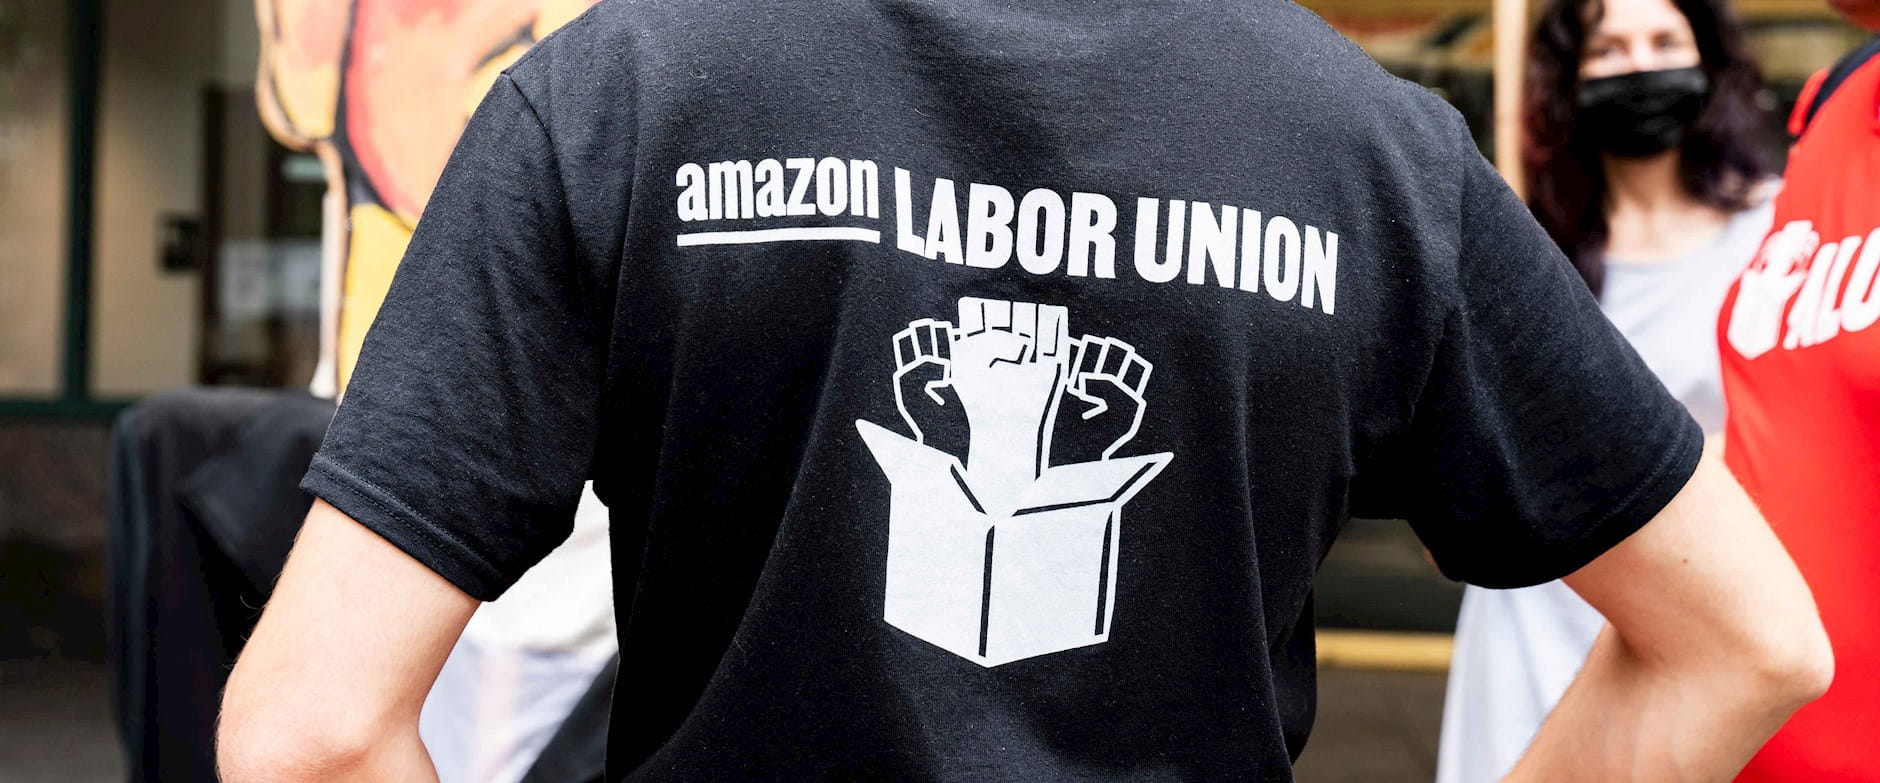 Person wearing T-shirt in support of the Amazon labor union